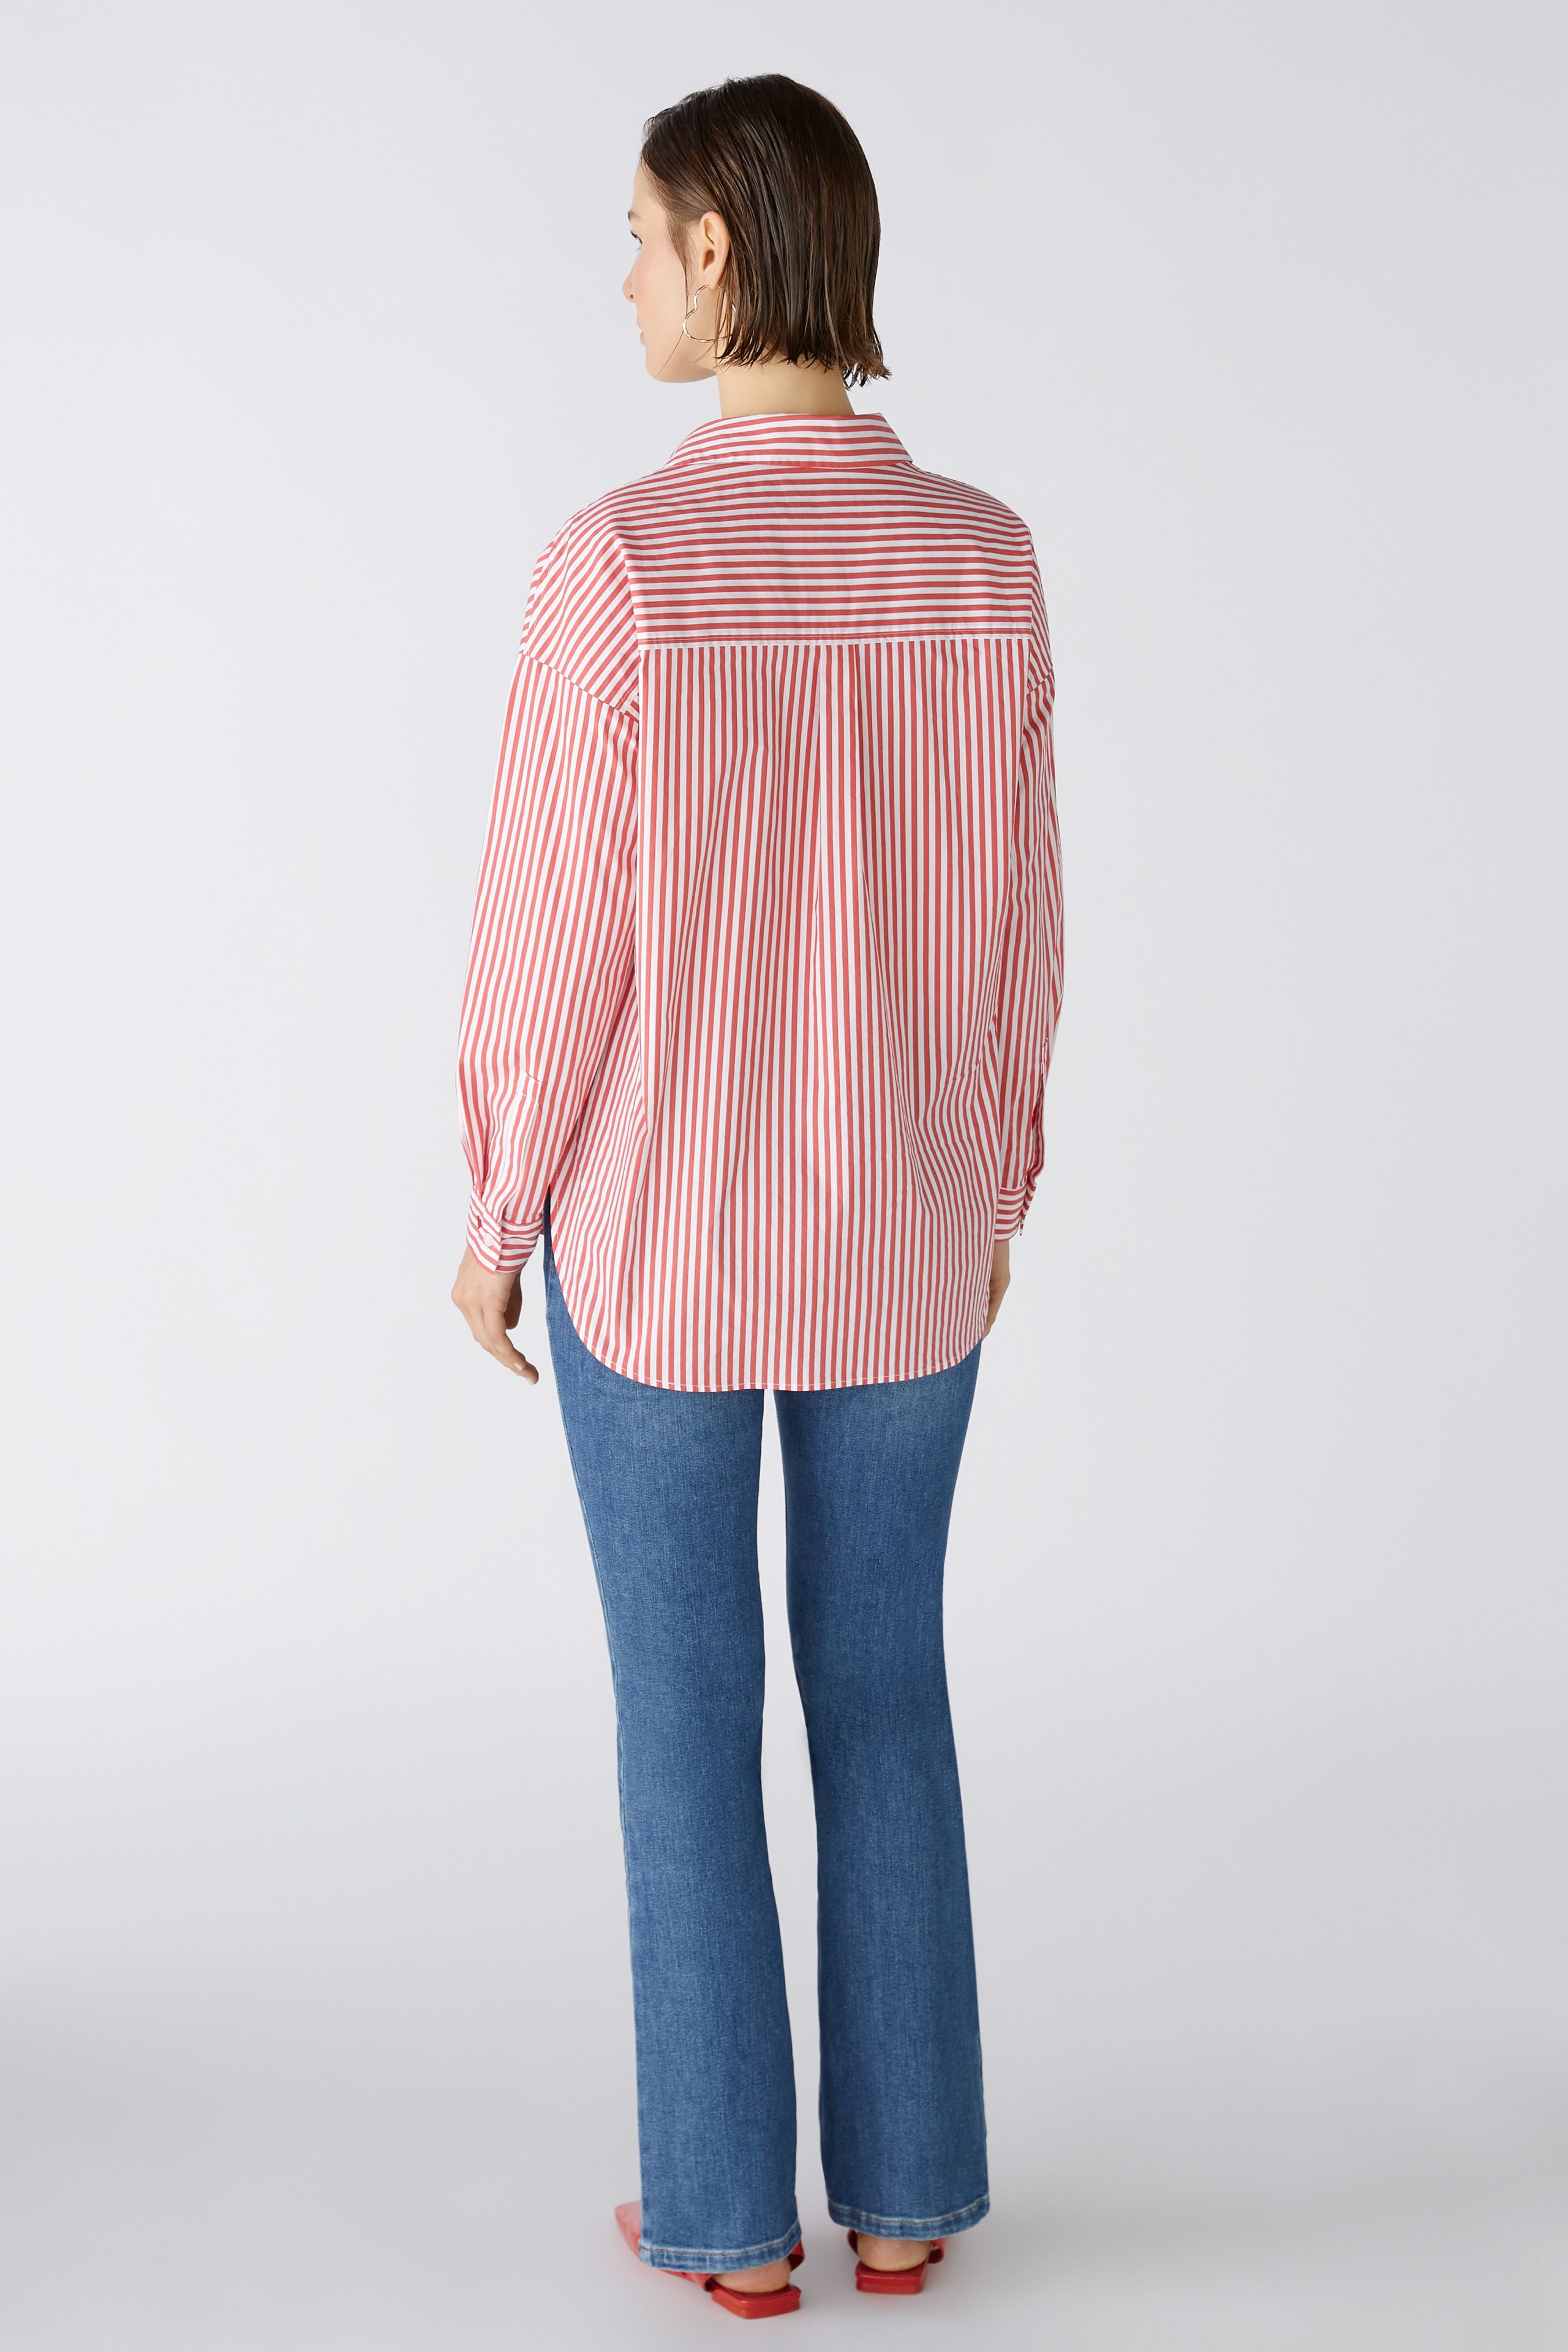 Stripe Shirt in Red/White